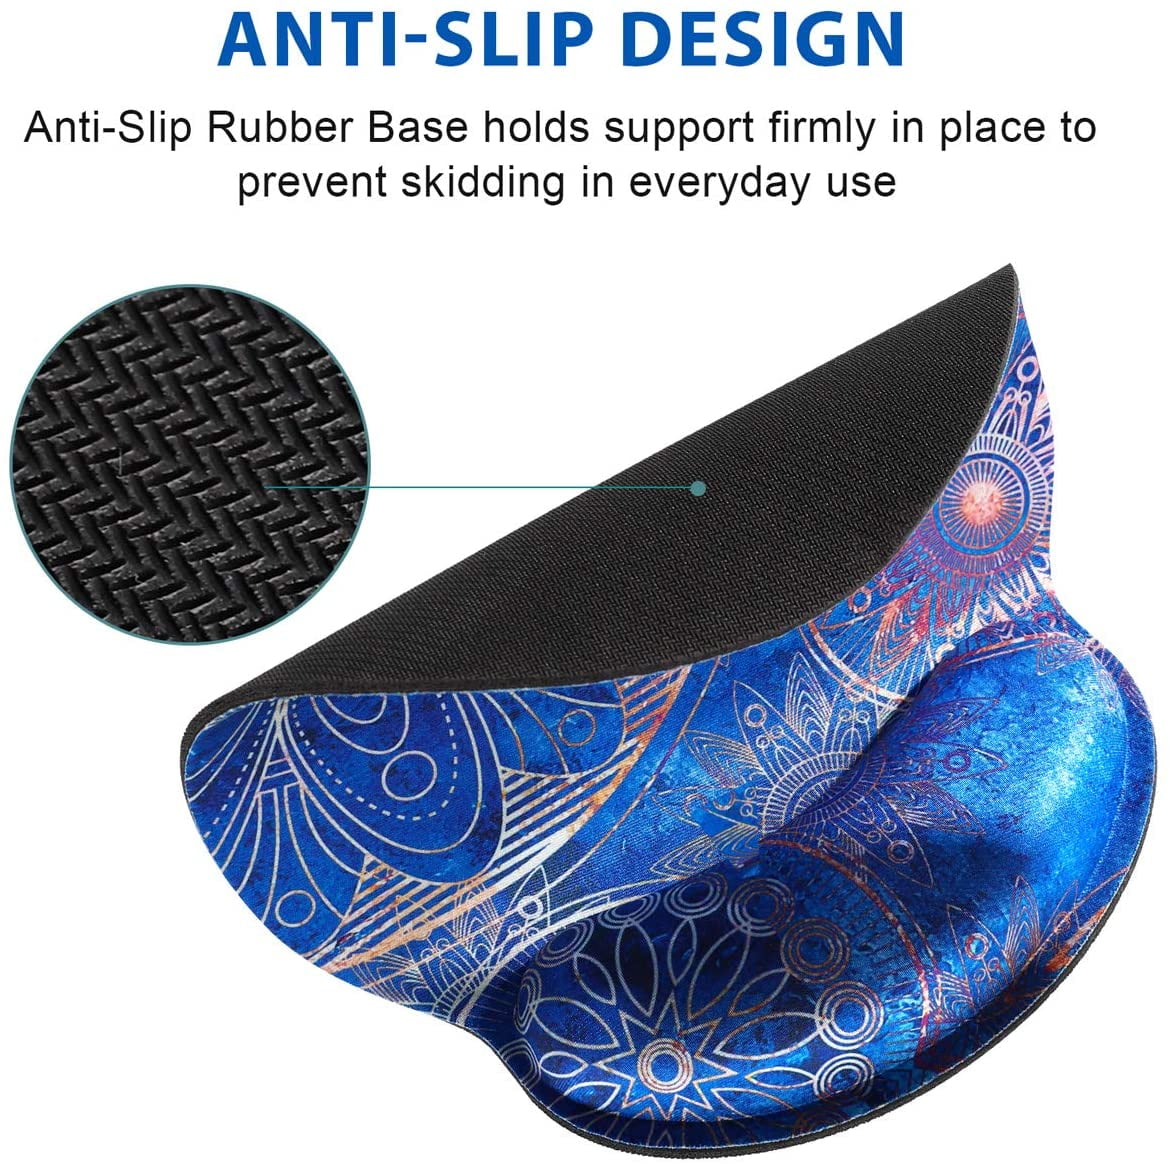 Ergonomic Mouse Pad Wrist Rest Support Mouse Wrist Rest Pad for Laptop Computer Home Office Working Pain Relief ToLuLu Gel Mouse Pads with Non-Slip Rubber Base Memory Foam Mousepad Blue Mandala